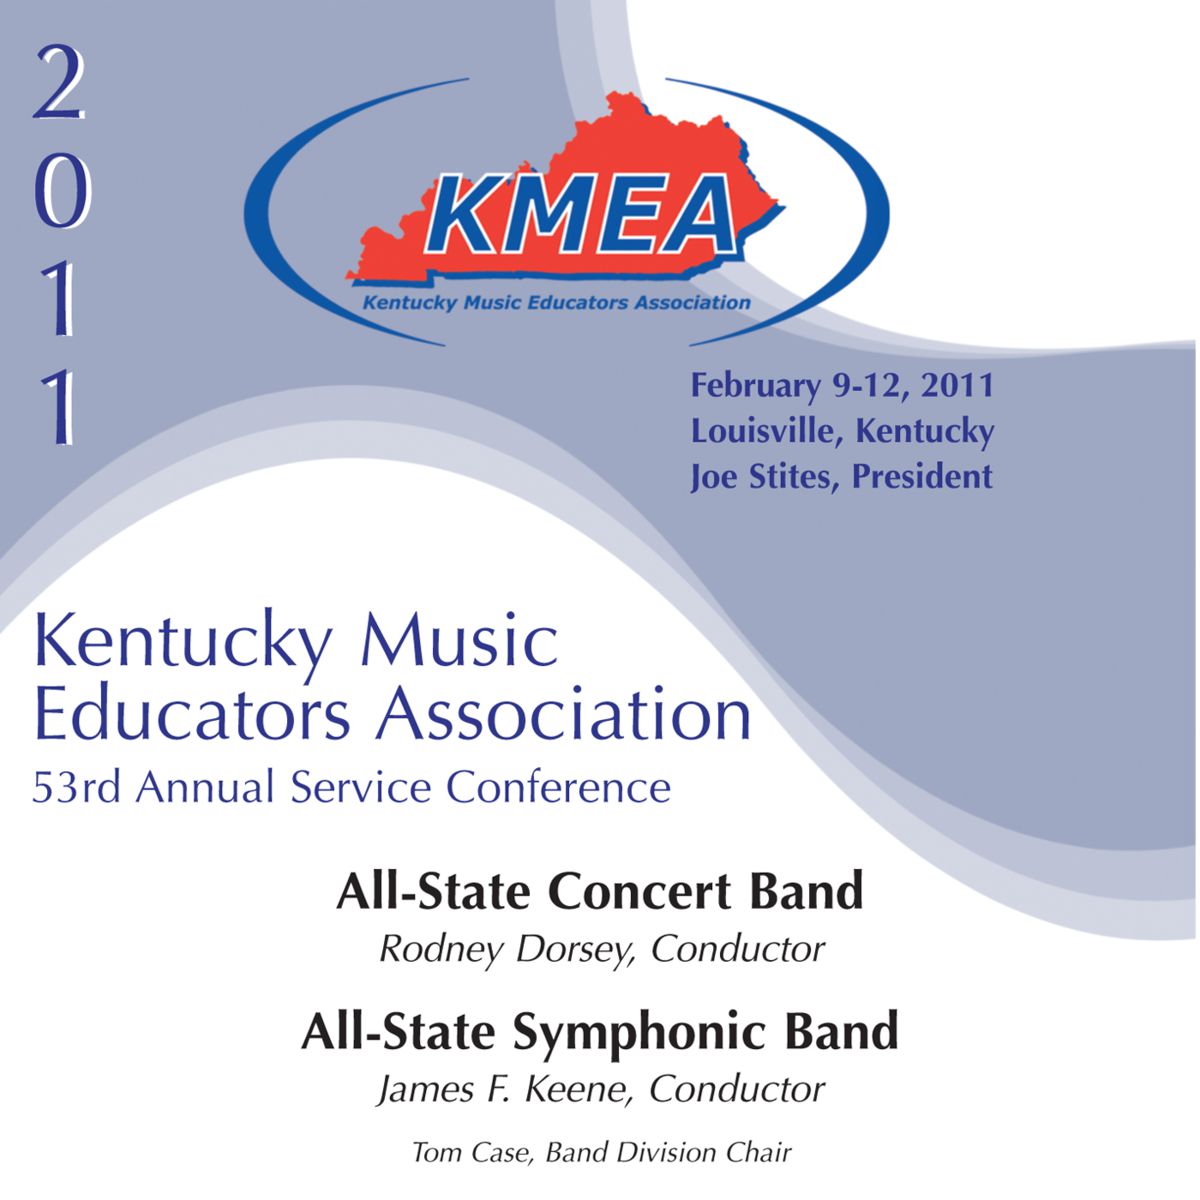 2011 Kentucky Music Educators Association: All-State Concert Band and All-State Symphonic Band - clicca qui